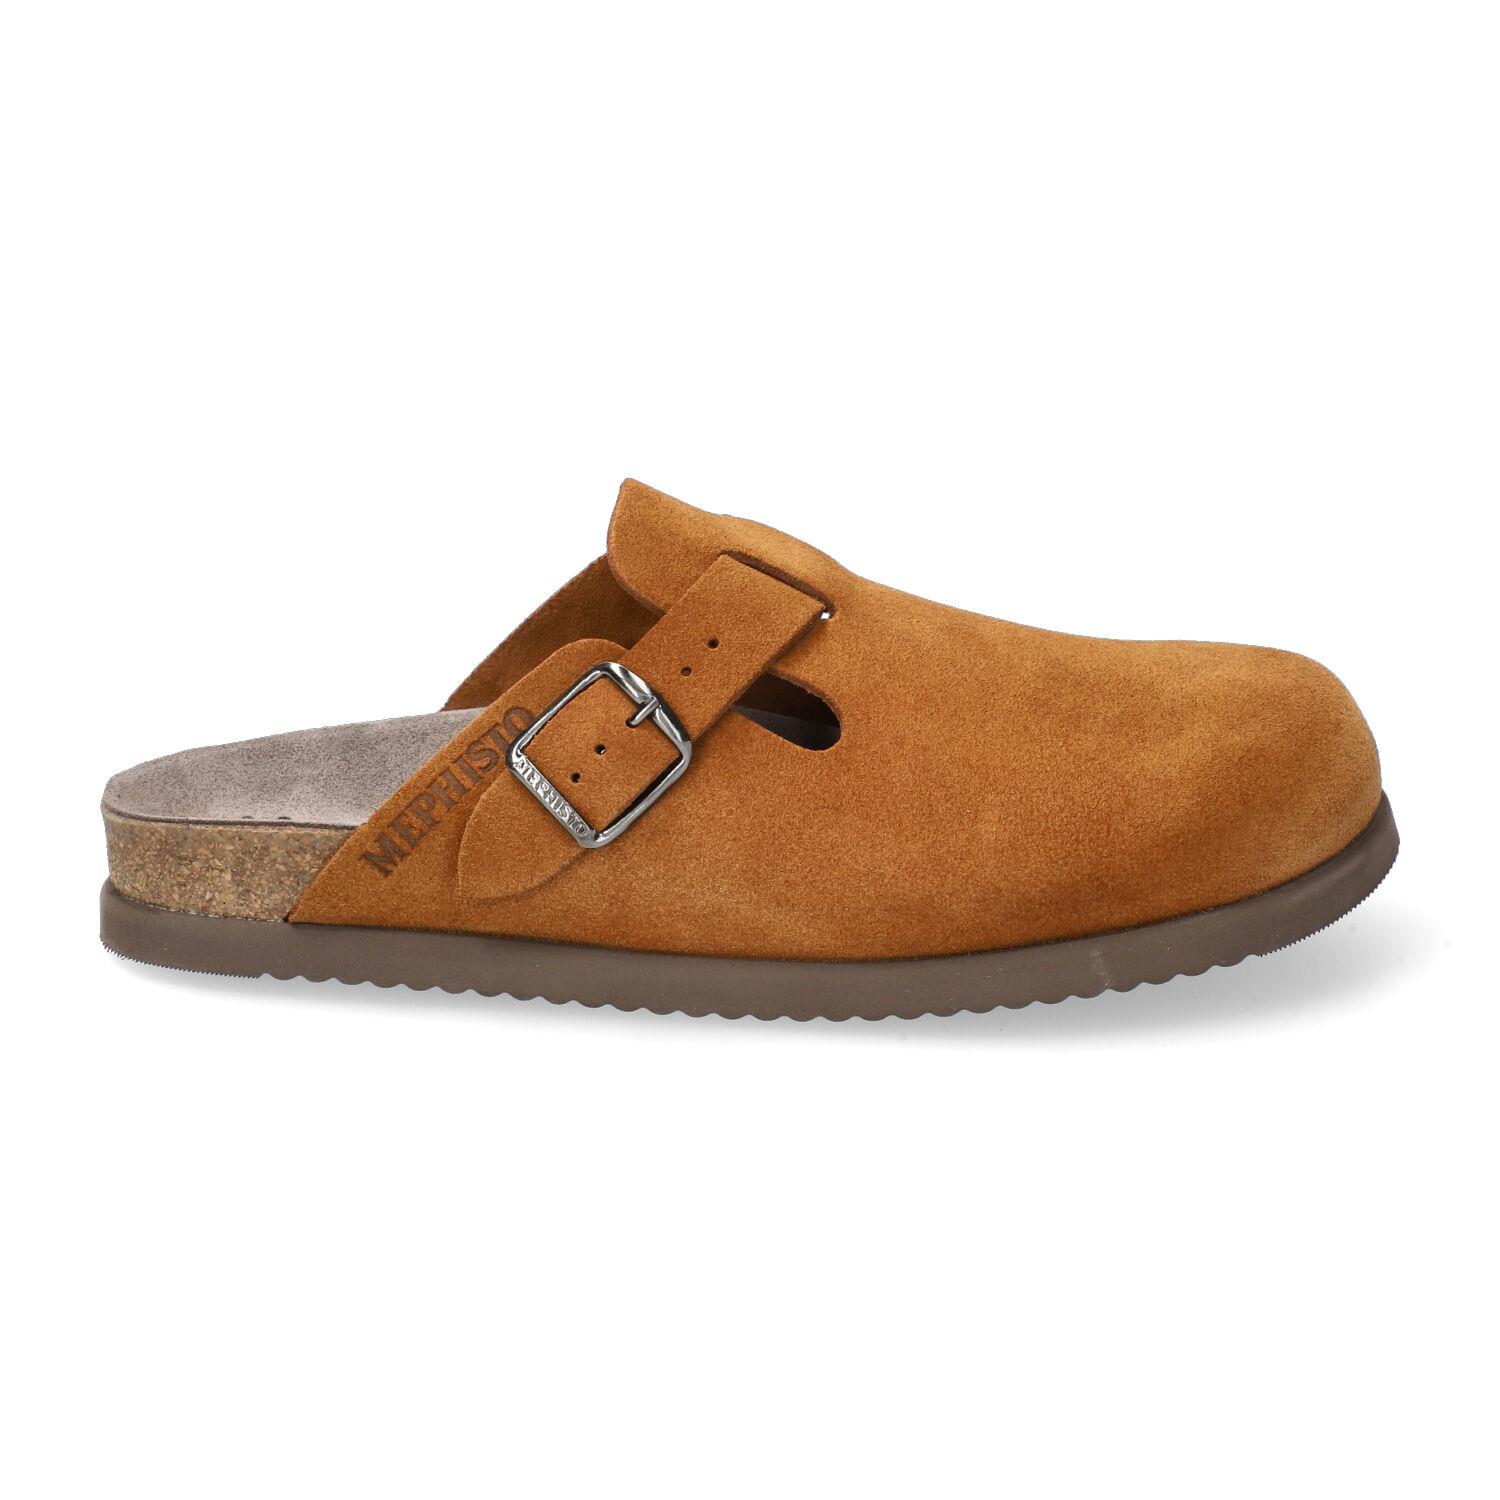 chaussons homme modèle Nathan Nubuck tobacco - Mephisto